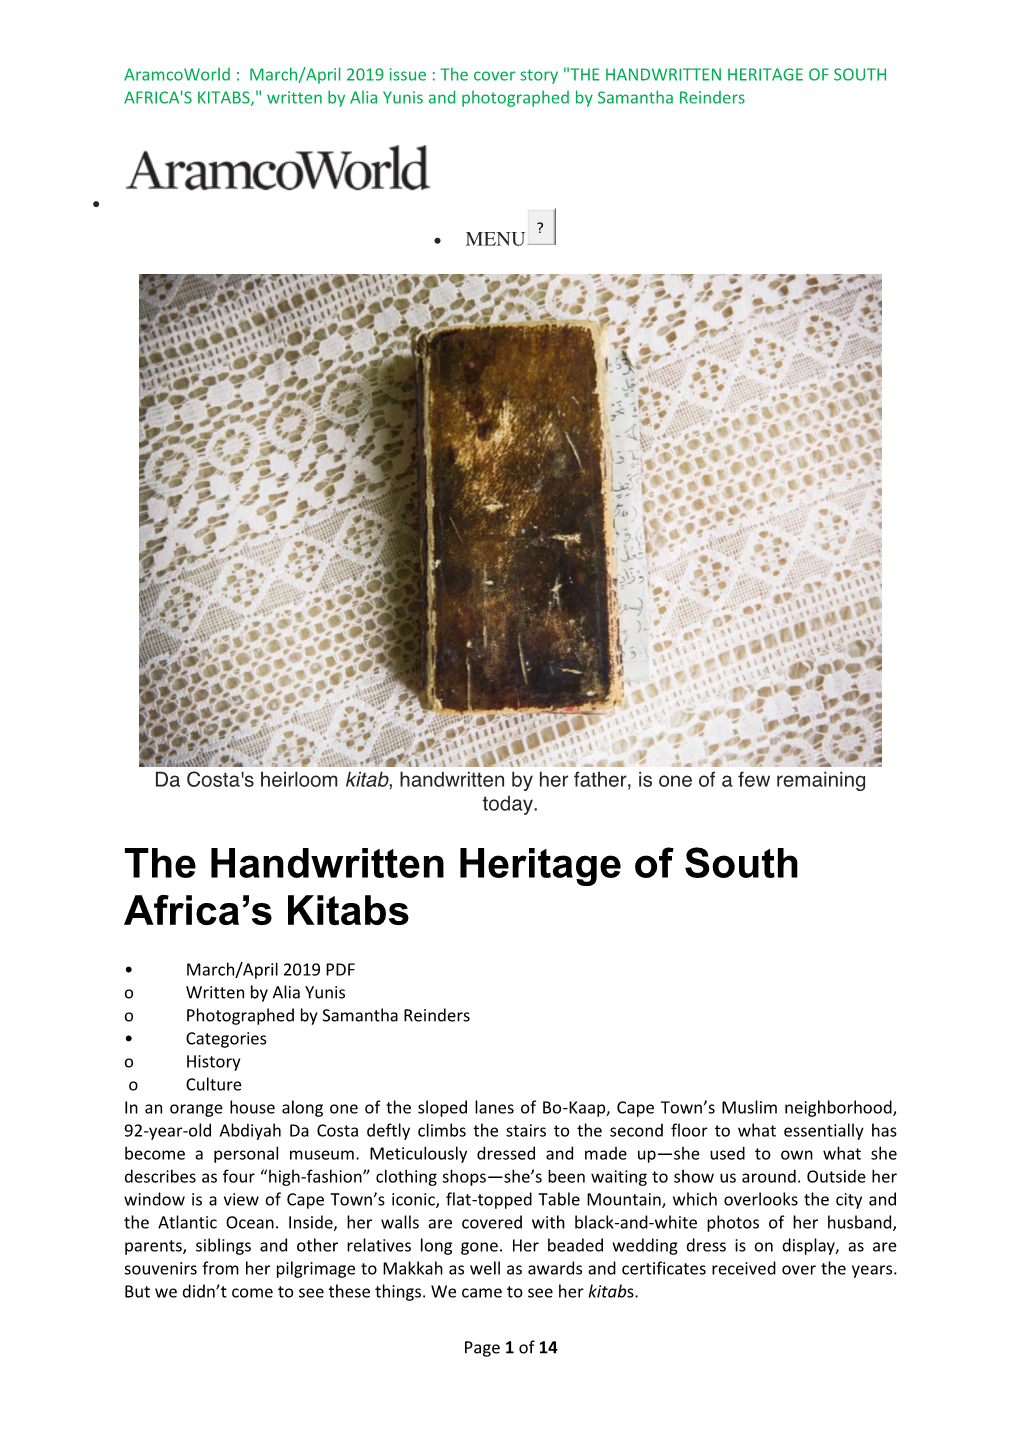 THE HANDWRITTEN HERITAGE of SOUTH AFRICA's KITABS," Written by Alia Yunis and Photographed by Samantha Reinders